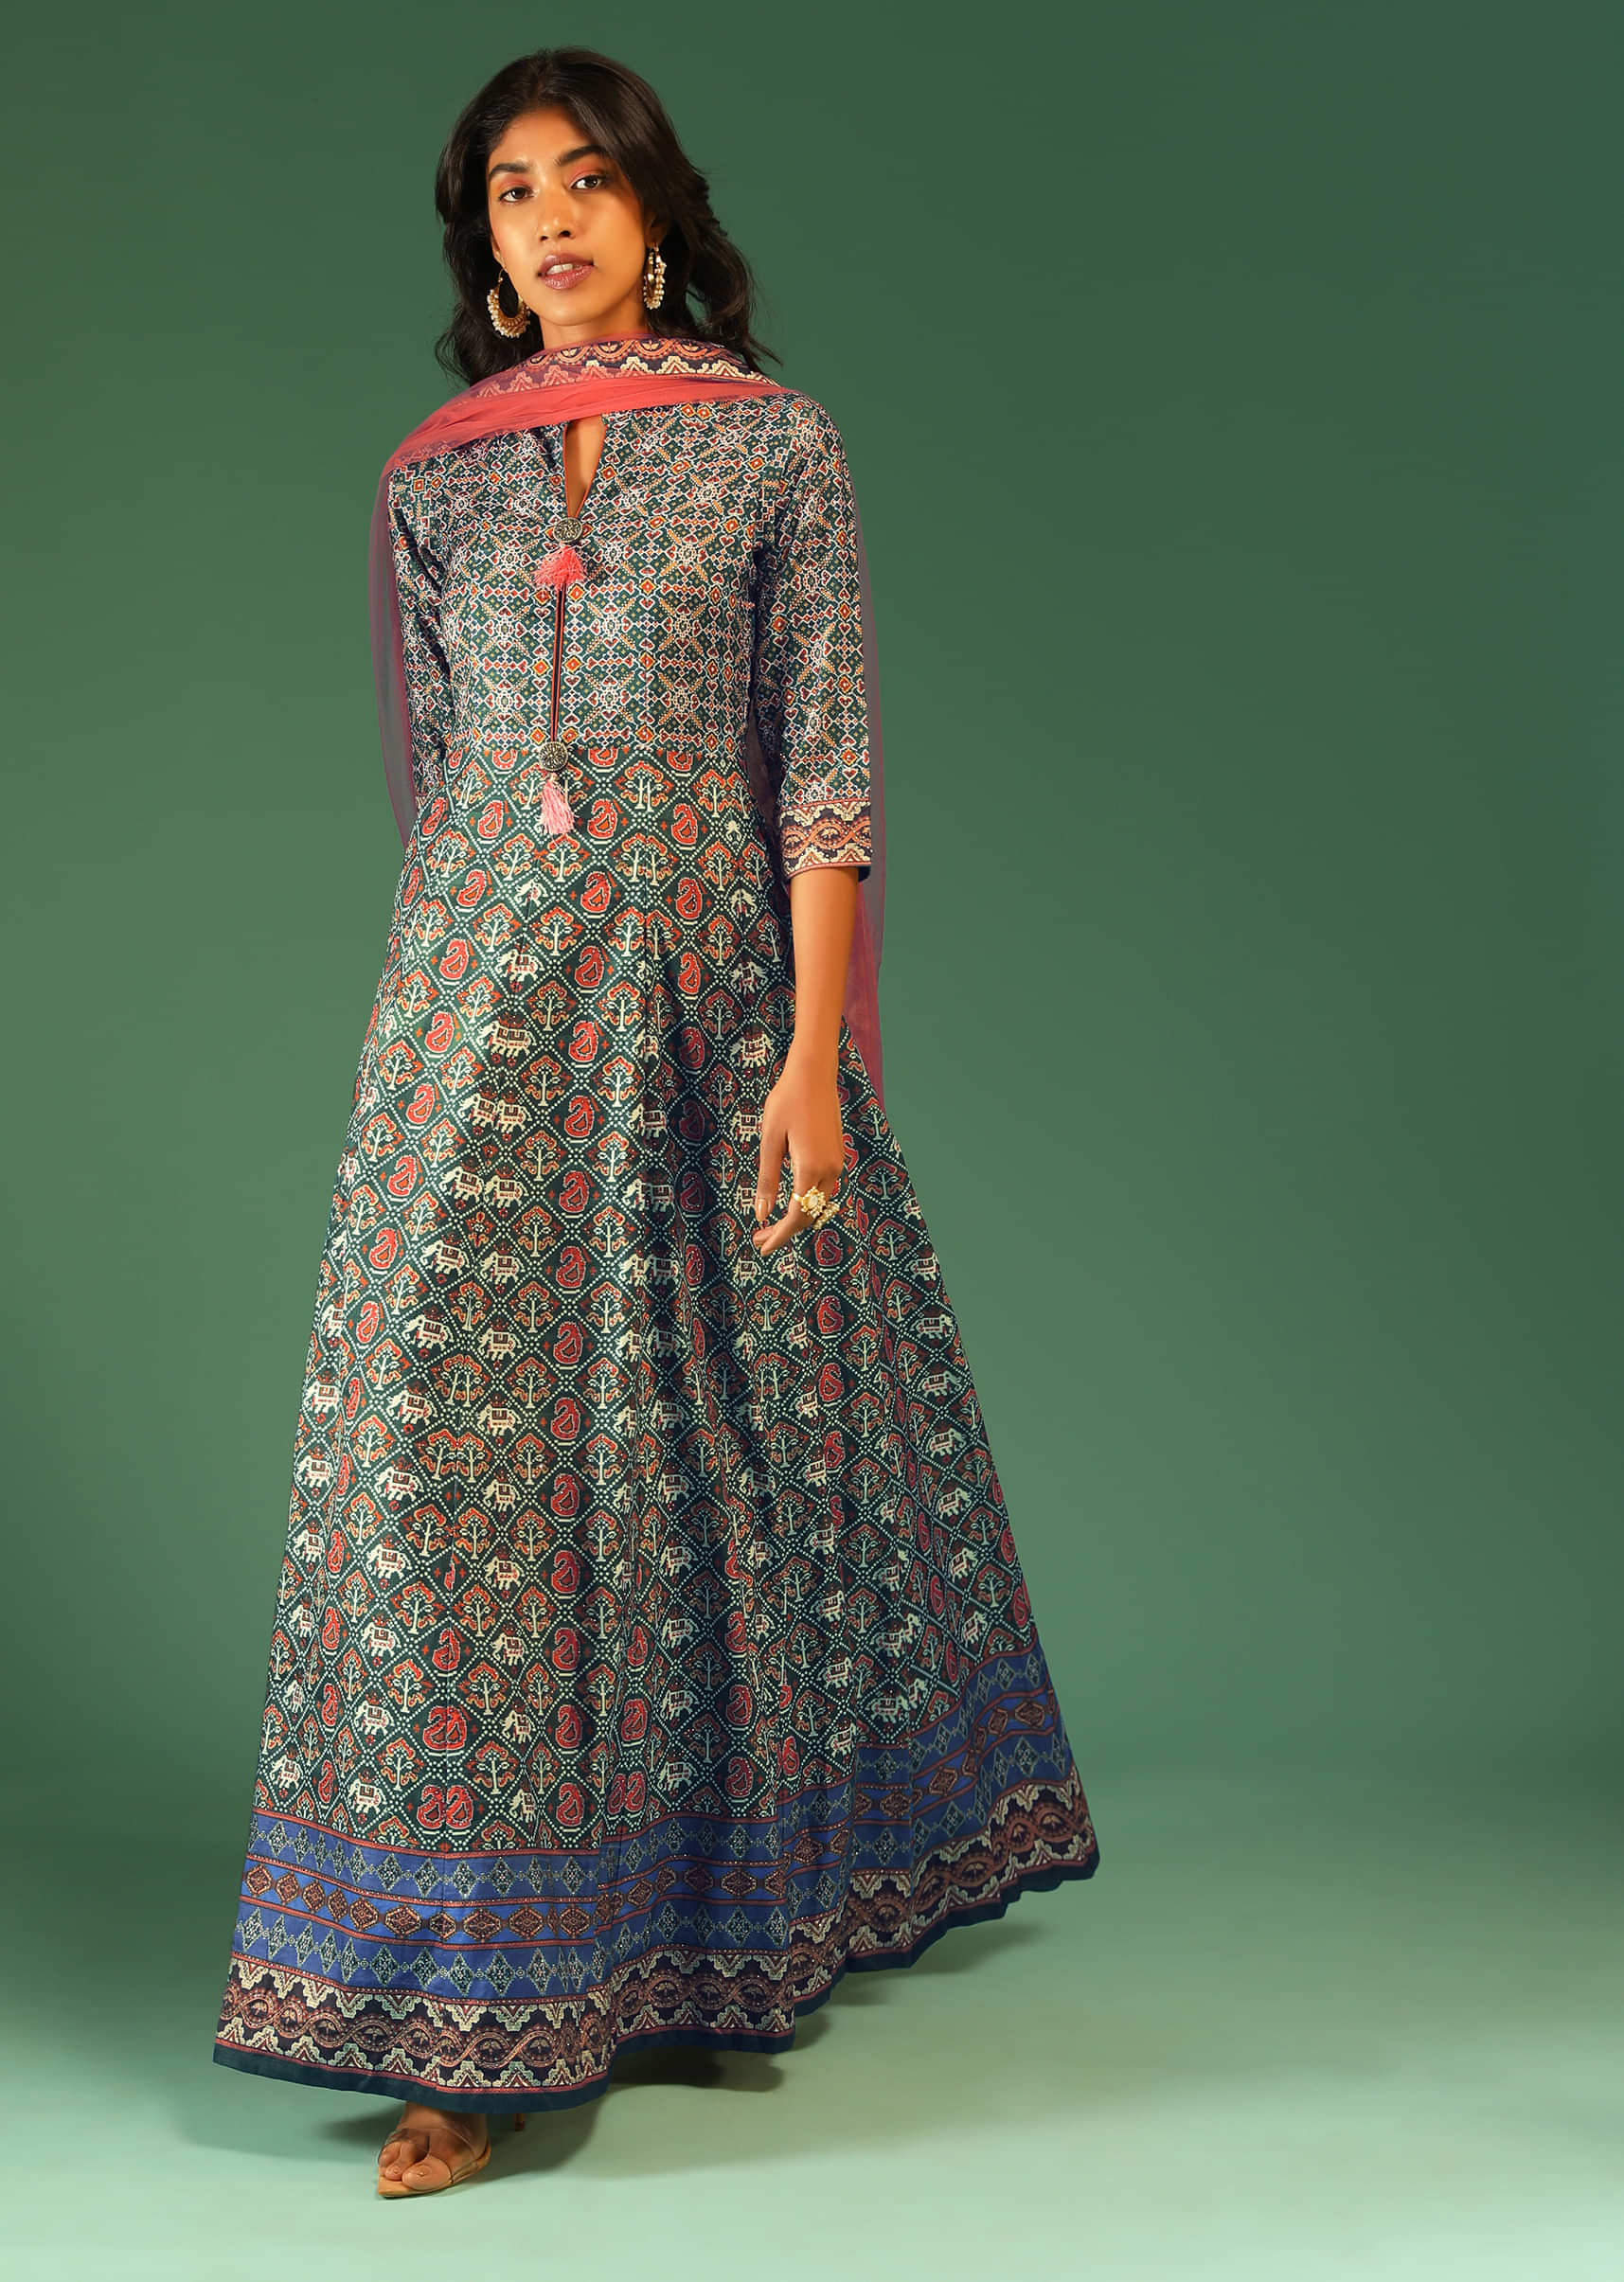 Hunter Green Anarkali Suit In Raw Silk With Patola Print And Kundan Detailing Along With A Pink Net Dupatta  